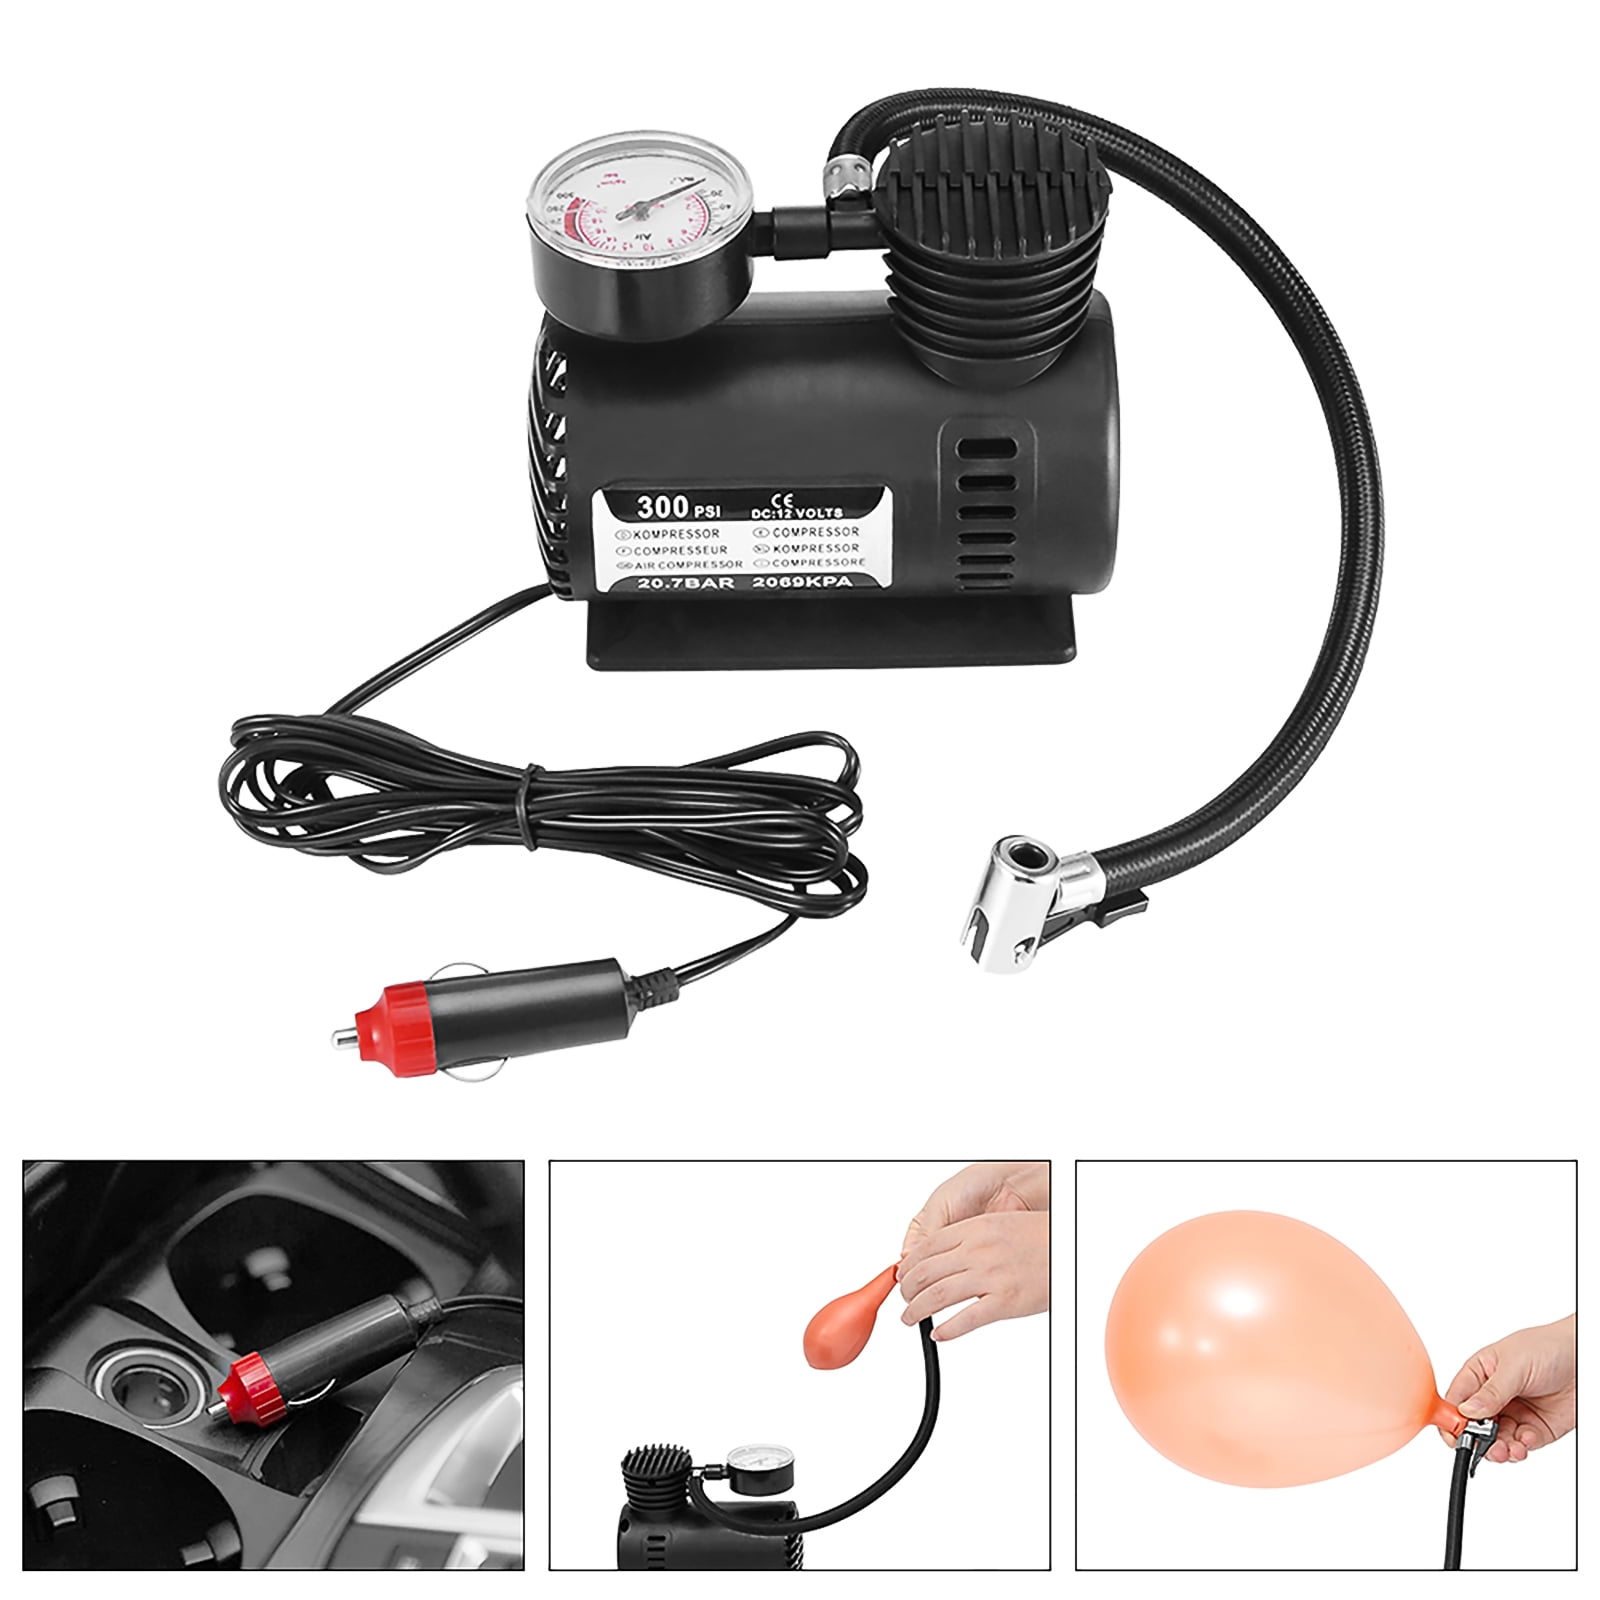 Air Compressor Pump, Car Air Pump Portable Tire Inflator Pump + Gauge 12V  300 PSI Tire Pump for Car, Truck, Bicycle, and Other Inflatables 